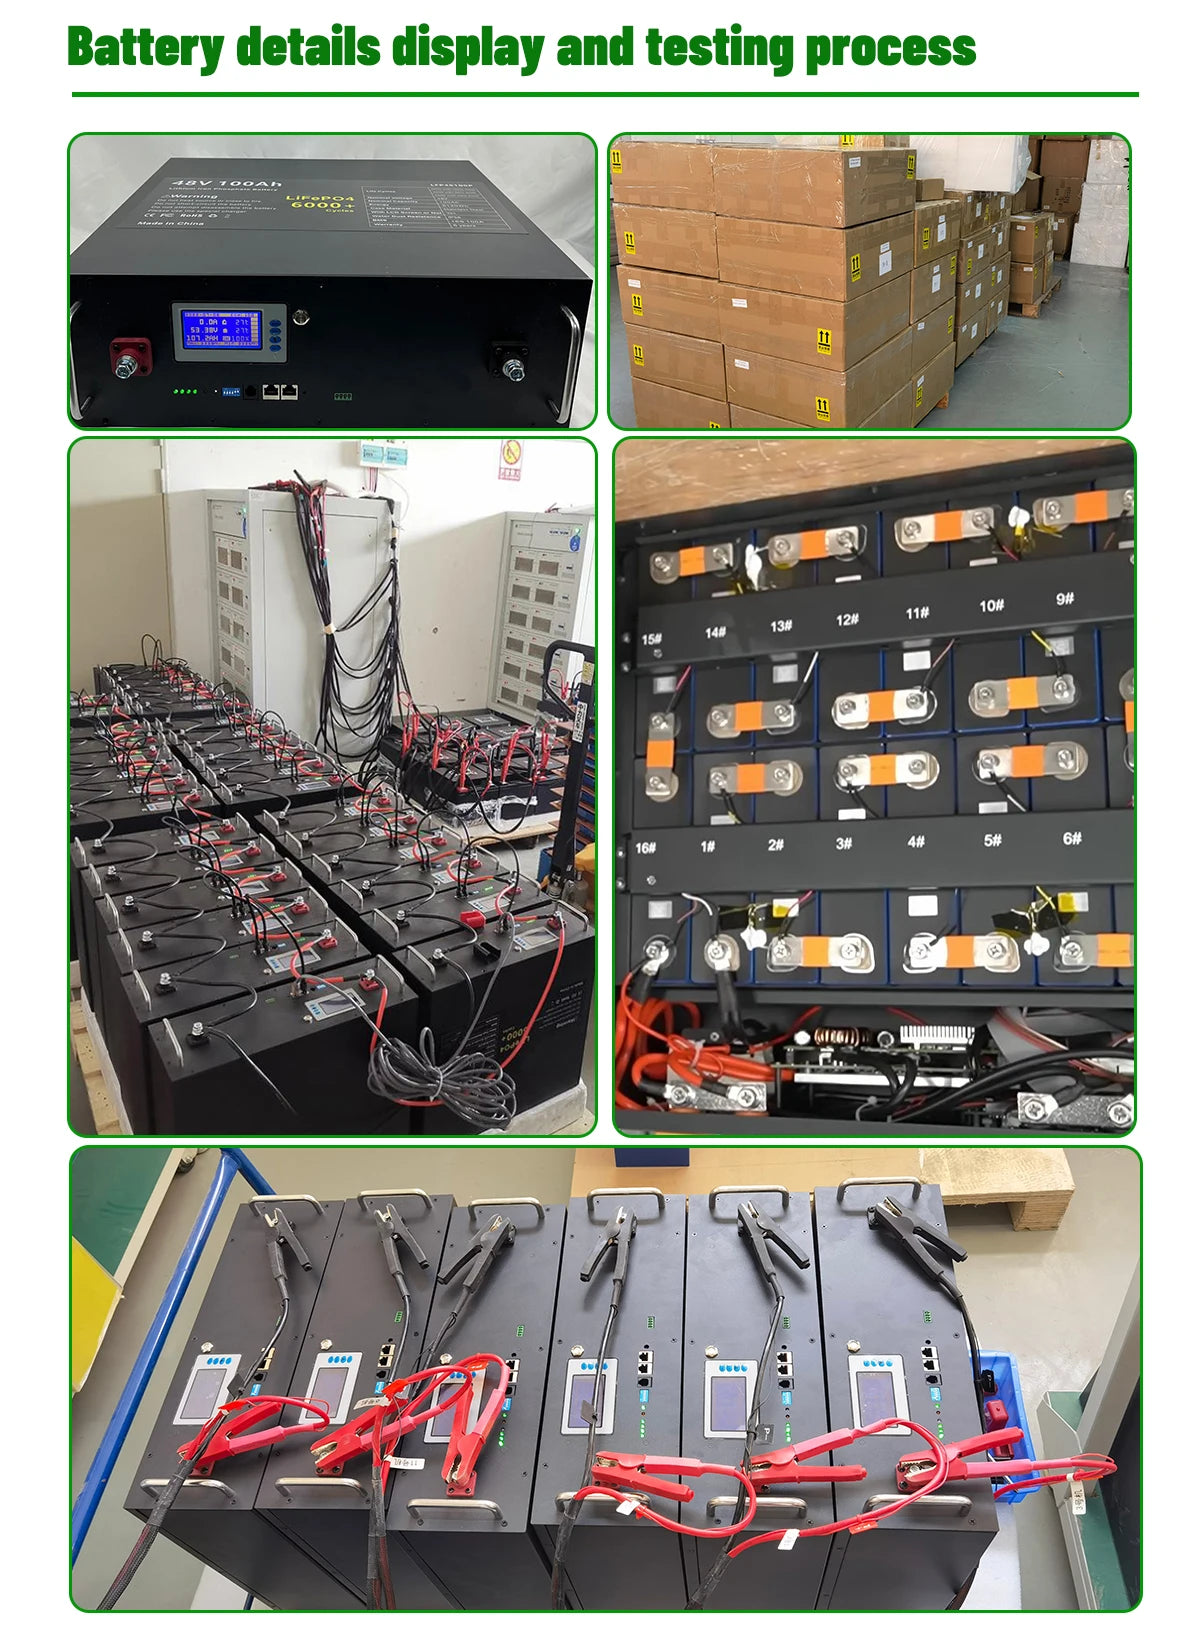 LiFePO4 48V 200AH 10KW Battery, Test results display voltage (FM), current (SLON) and efficiency (ICOR)